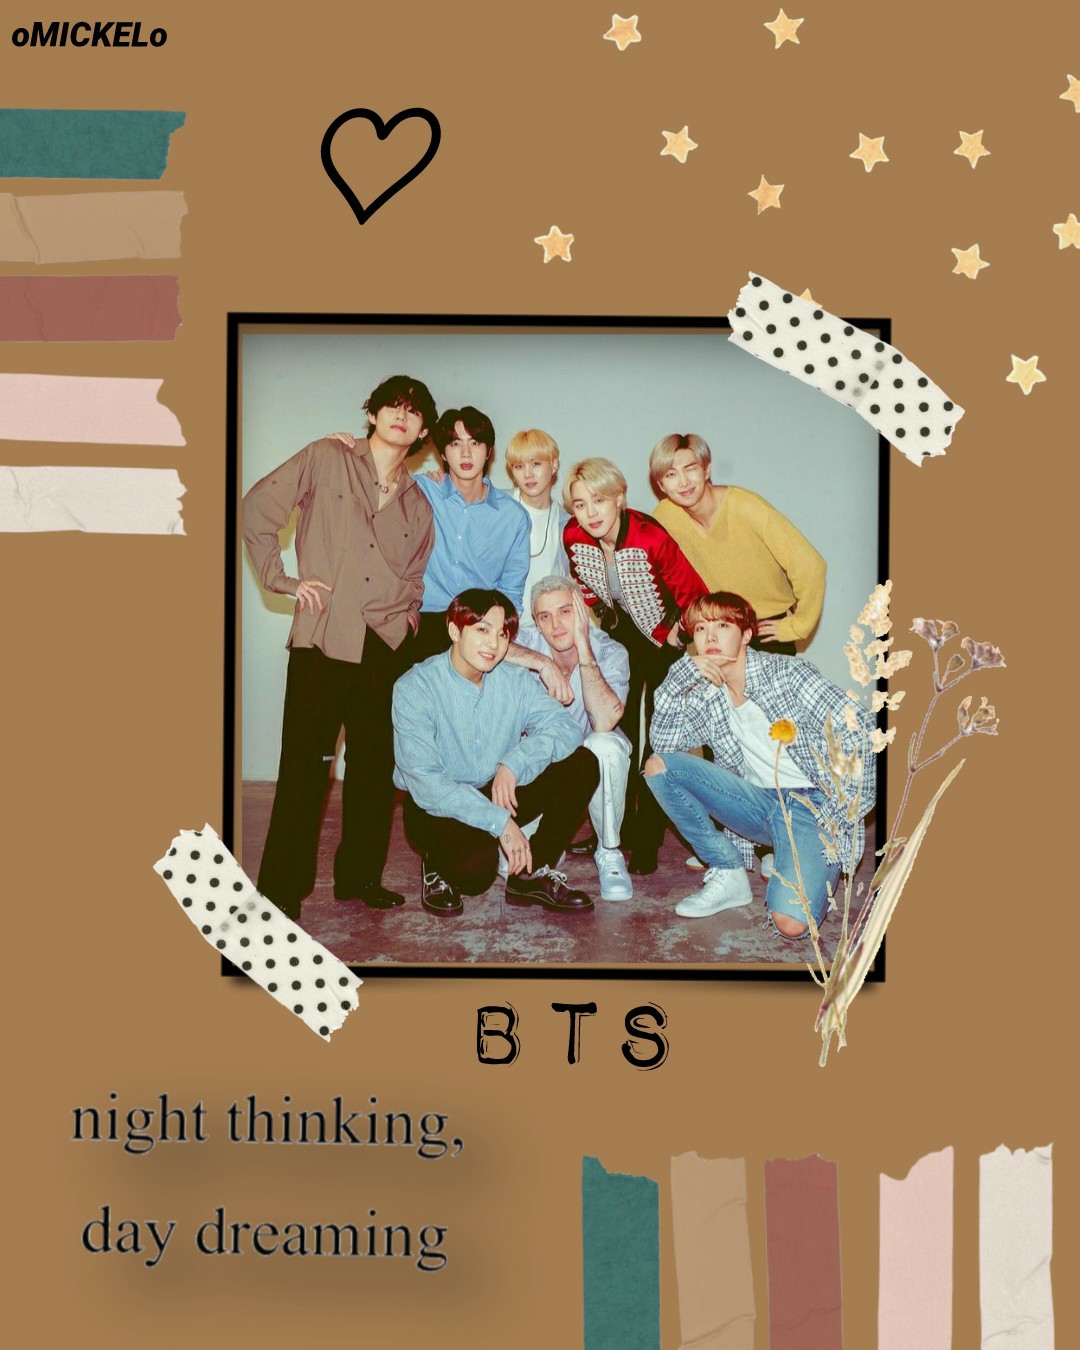 °🤎tap🤎°

°♡ bts♡° 
《 rlly rushed collage😳 but hope you still like it!!✌》